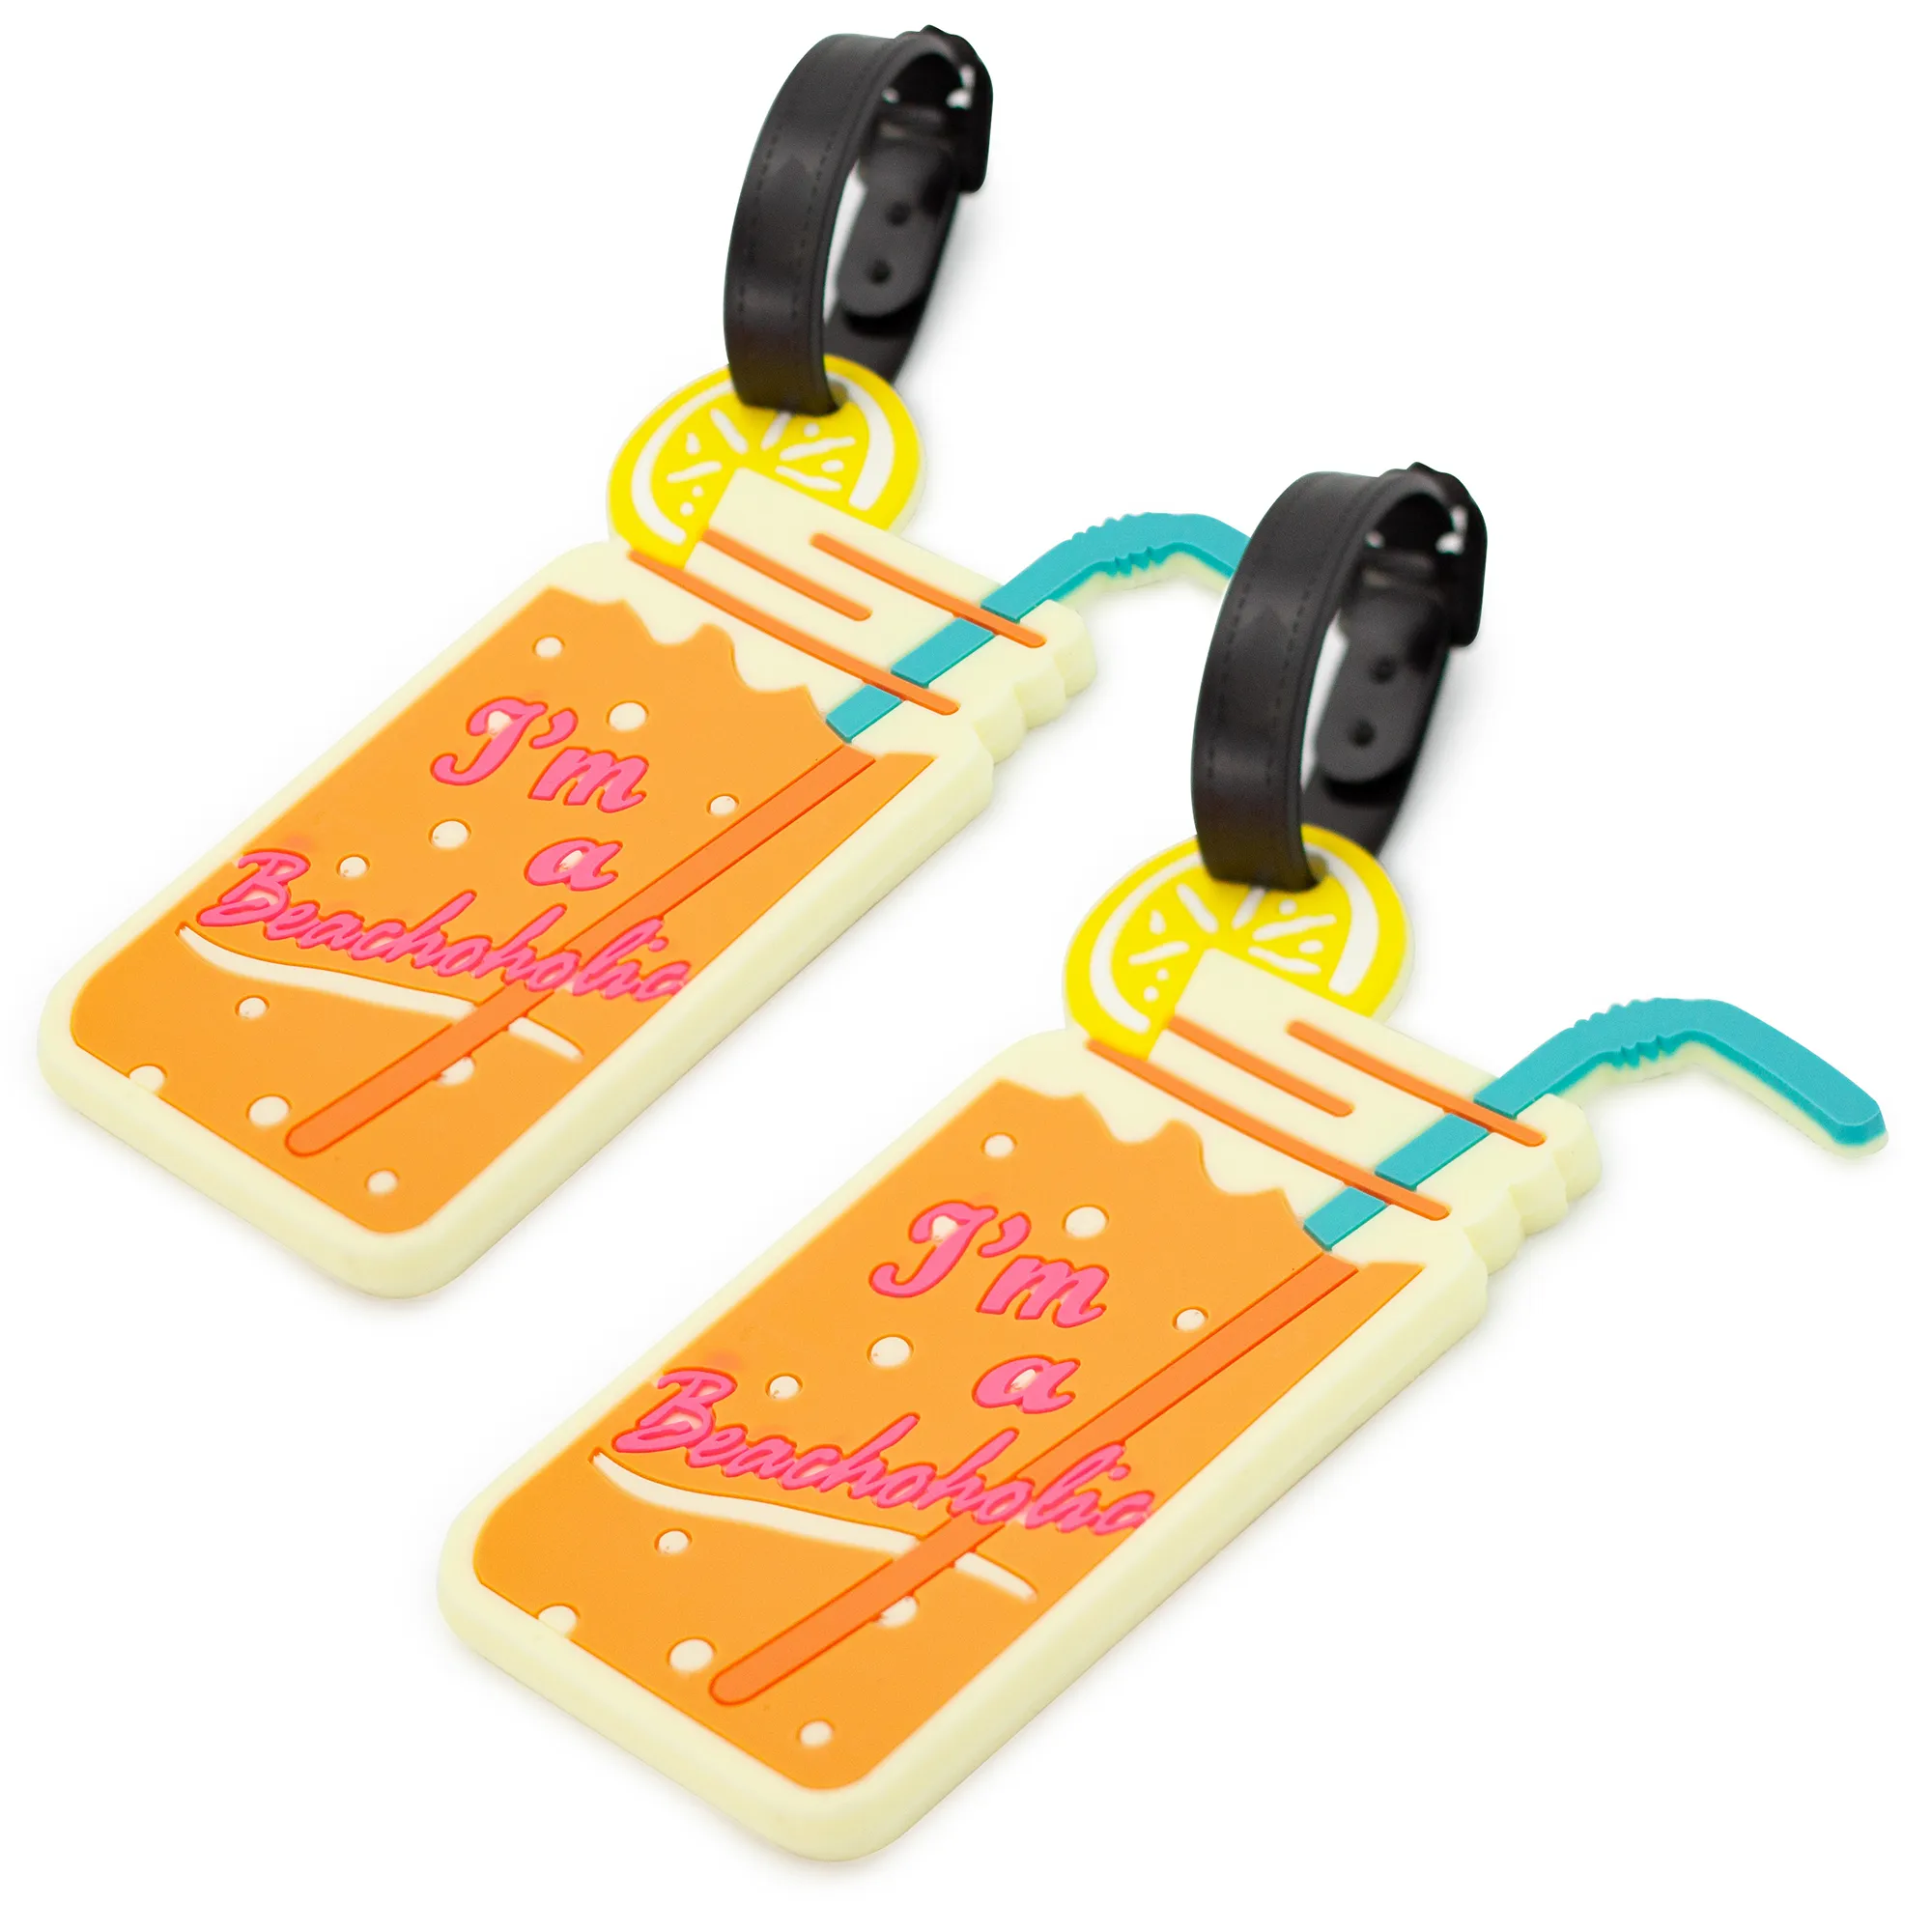 Novelty Collection Luggage Tags Set of 2